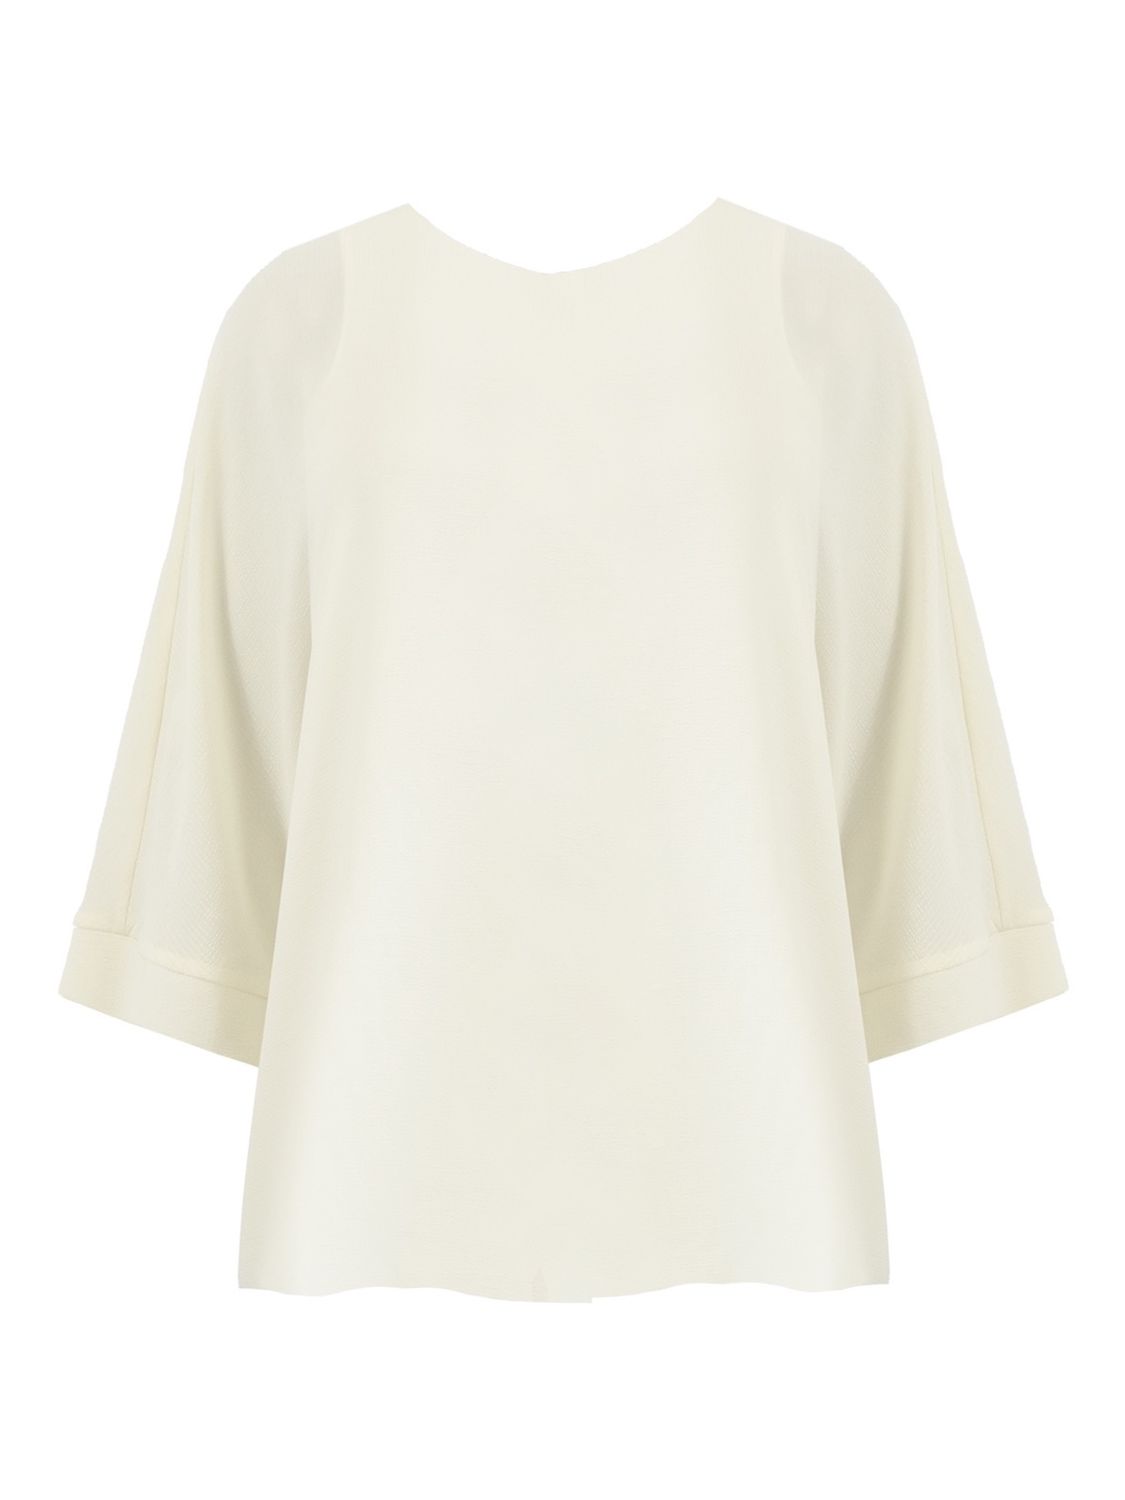 Buy Live Unlimited Curve Textured Overlay Top, White Online at johnlewis.com